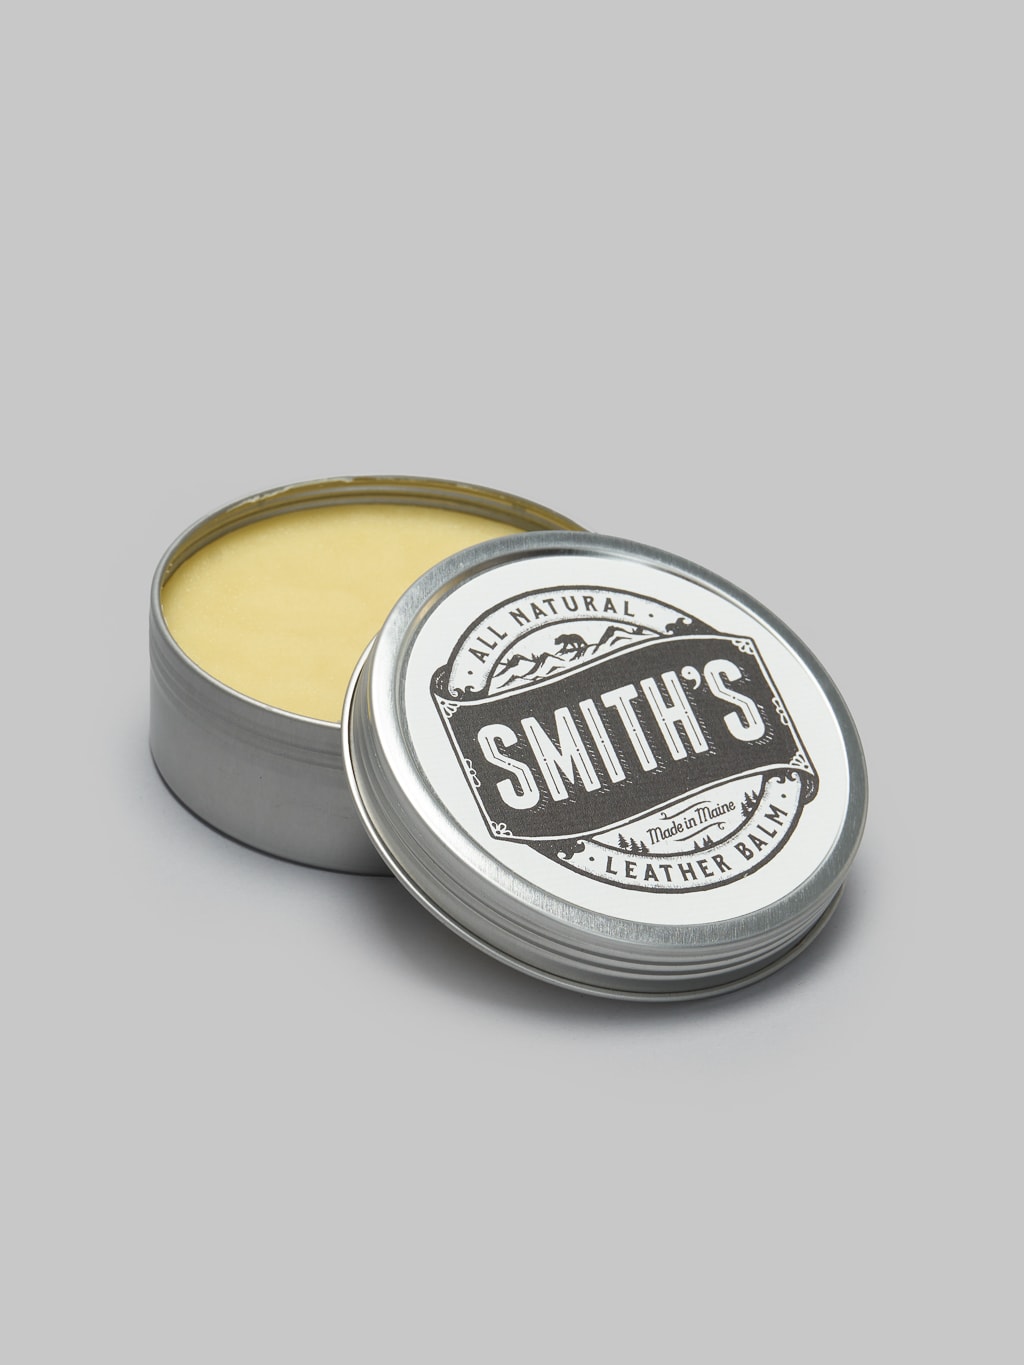 Smith s Leather Balm product interior